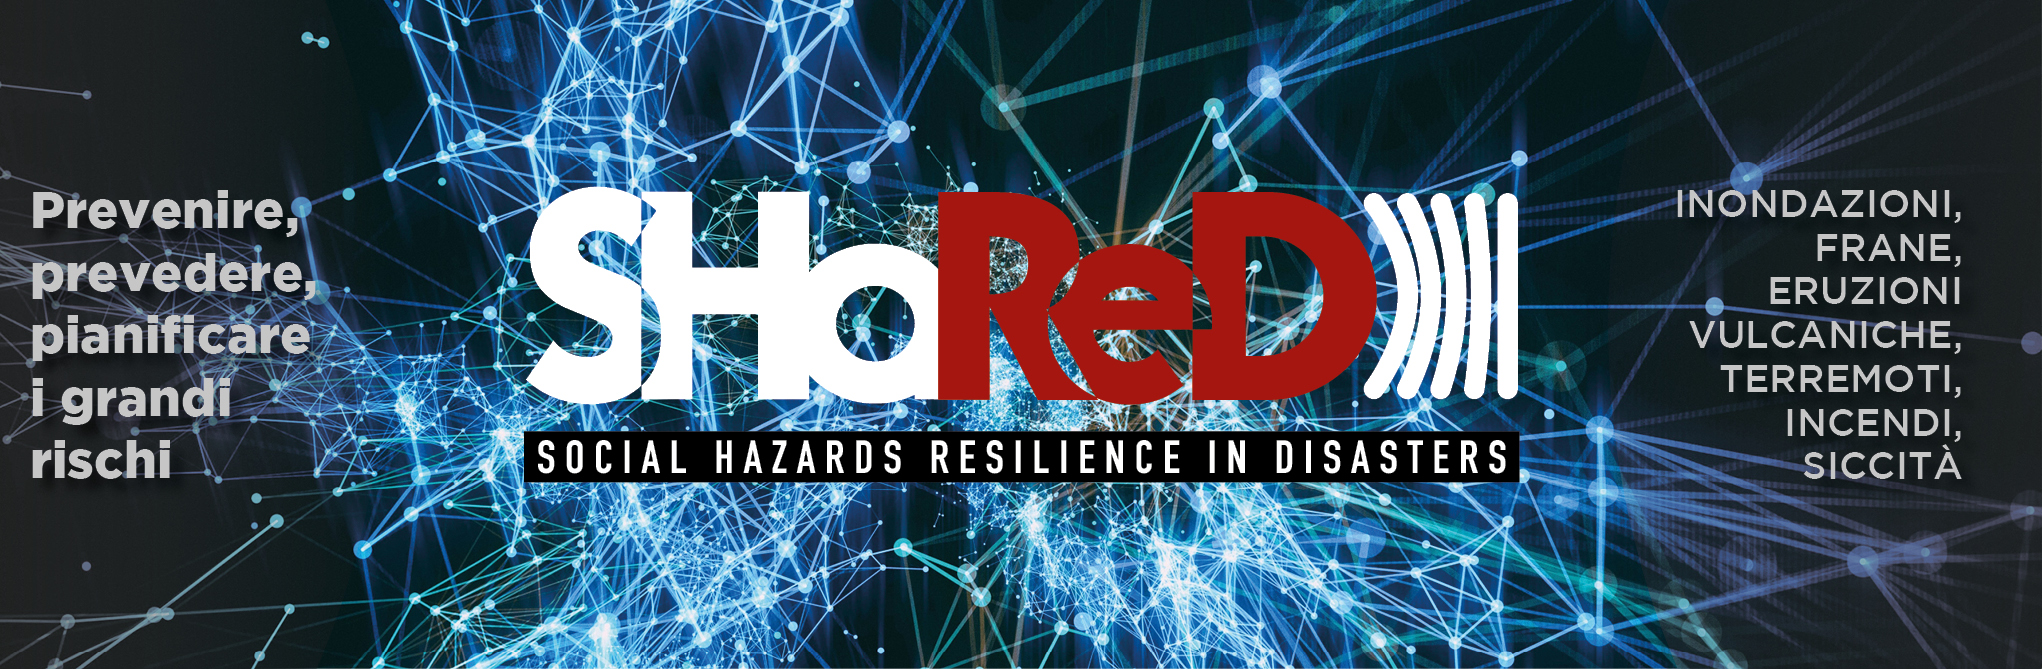 SHARED. SOCIAL HAZARDS RESILIENCE IN DISASTER